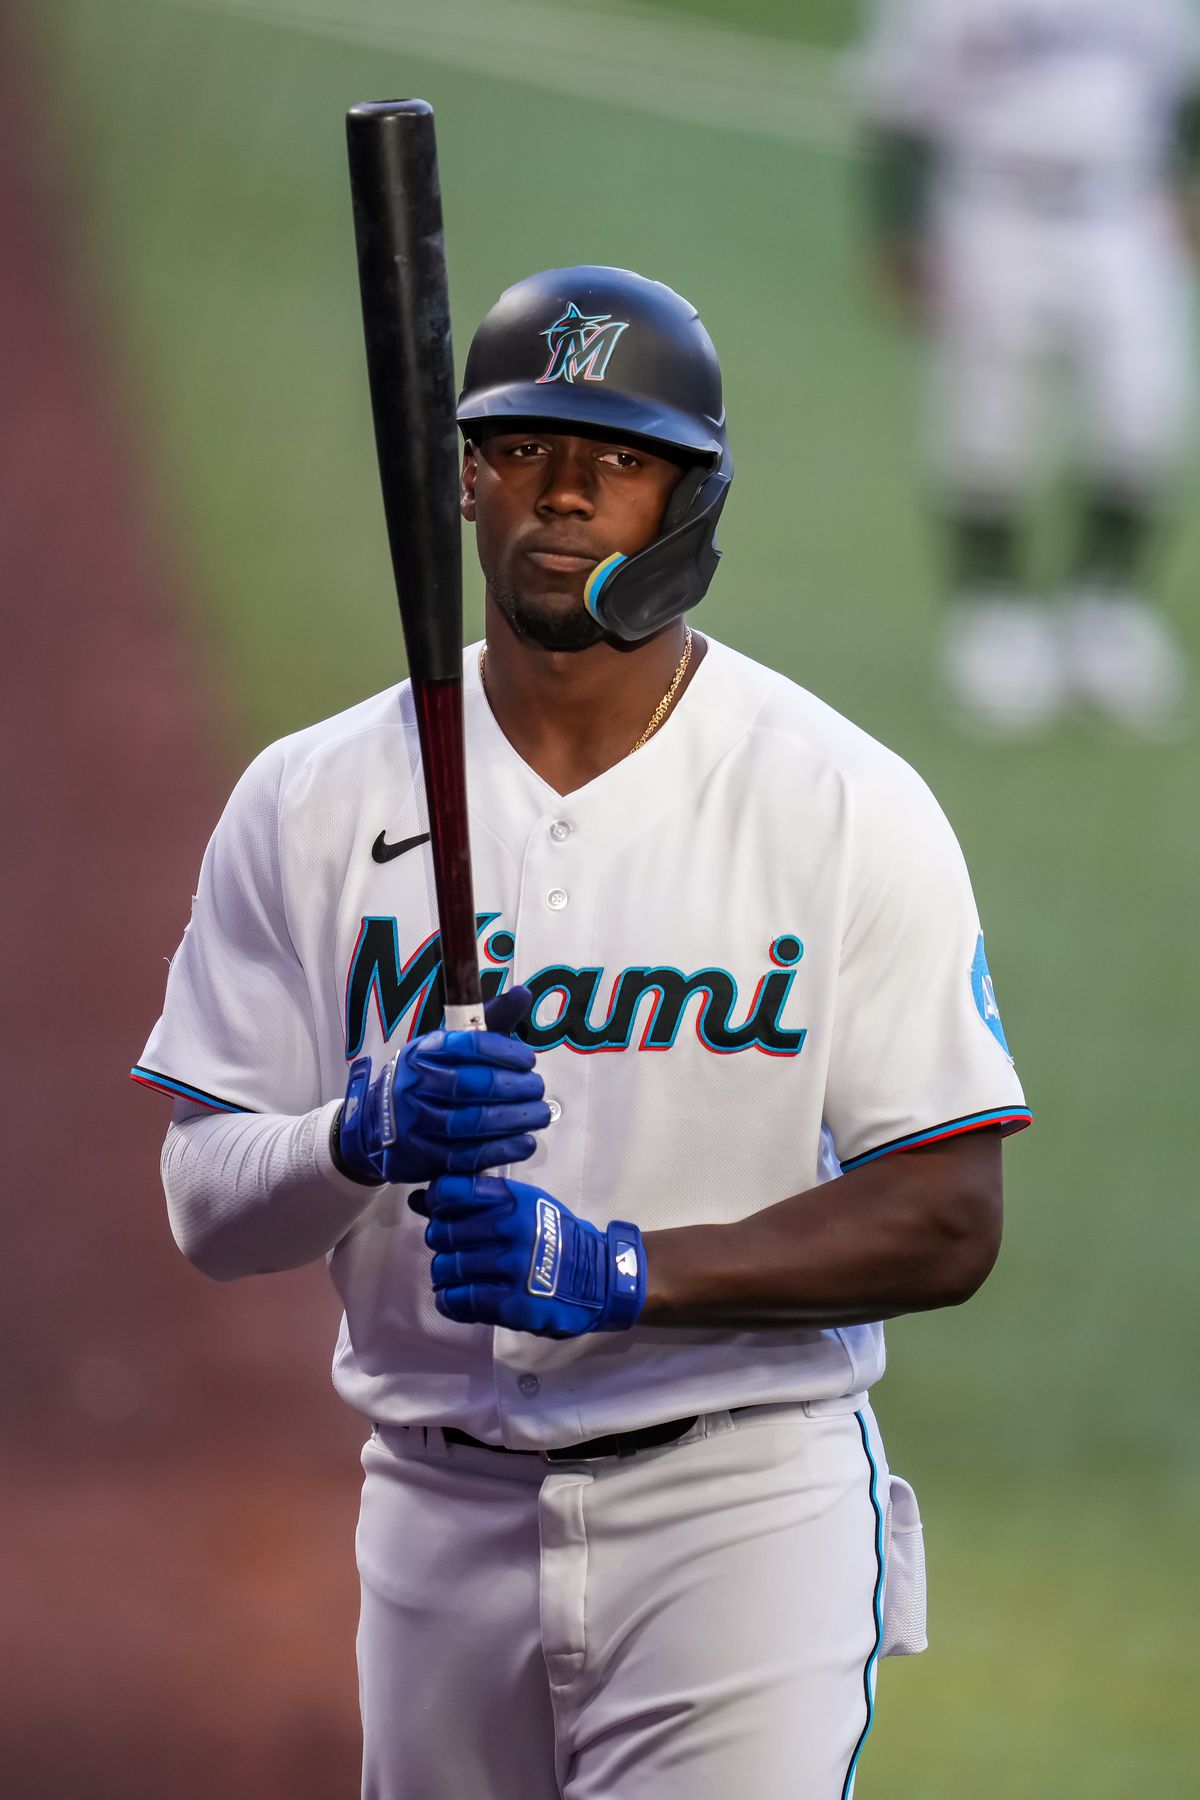 Jorge Soler #12 of the Miami Marlins looks on against the Minnesota Twins on April 4, 2023 at loanDepot park in Miami, Florida.